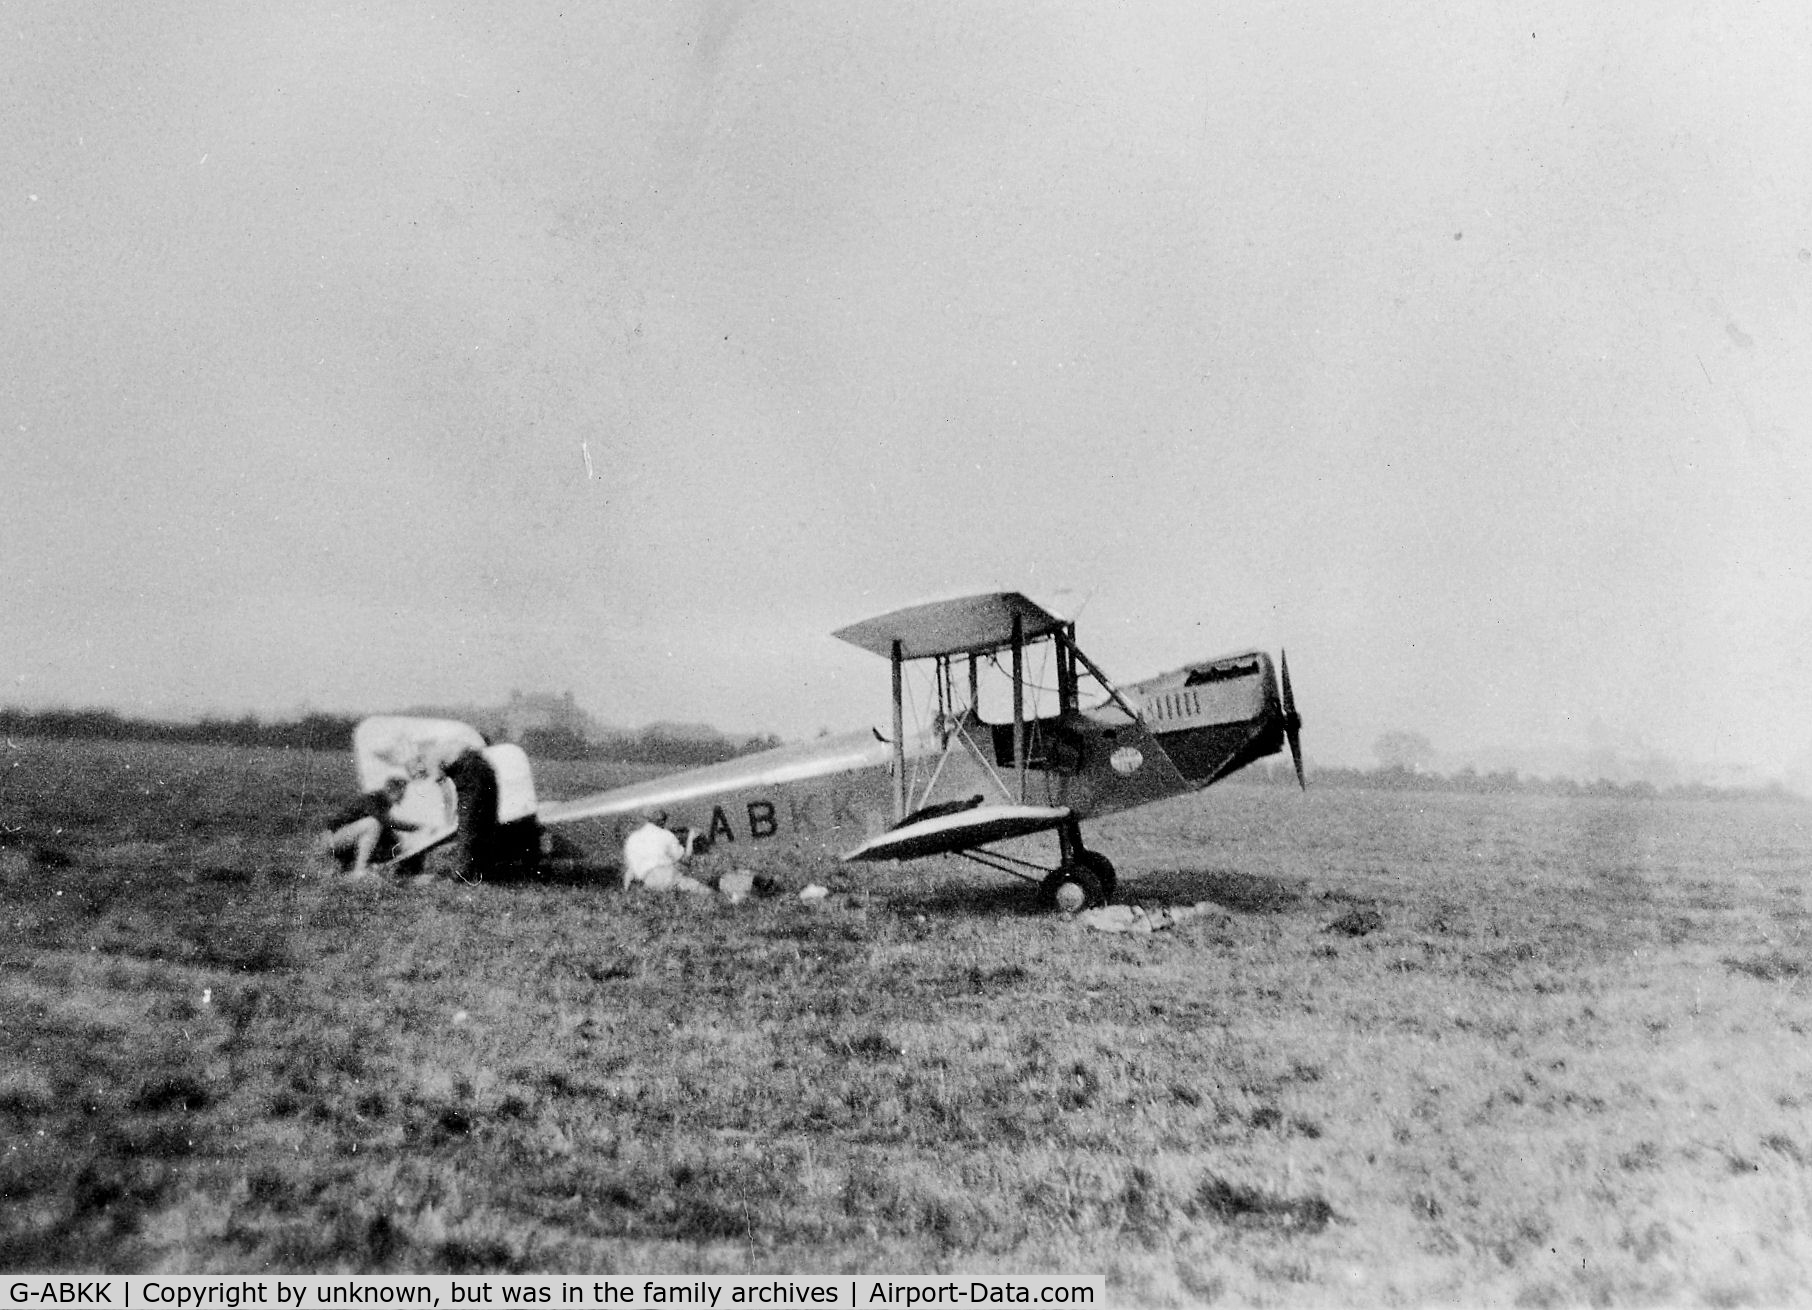 G-ABKK, 1934 Spartan Three Seater I C/N 58, his photo was taken in my Grandfathers field at Westmains farm, Grange mouth Scotland